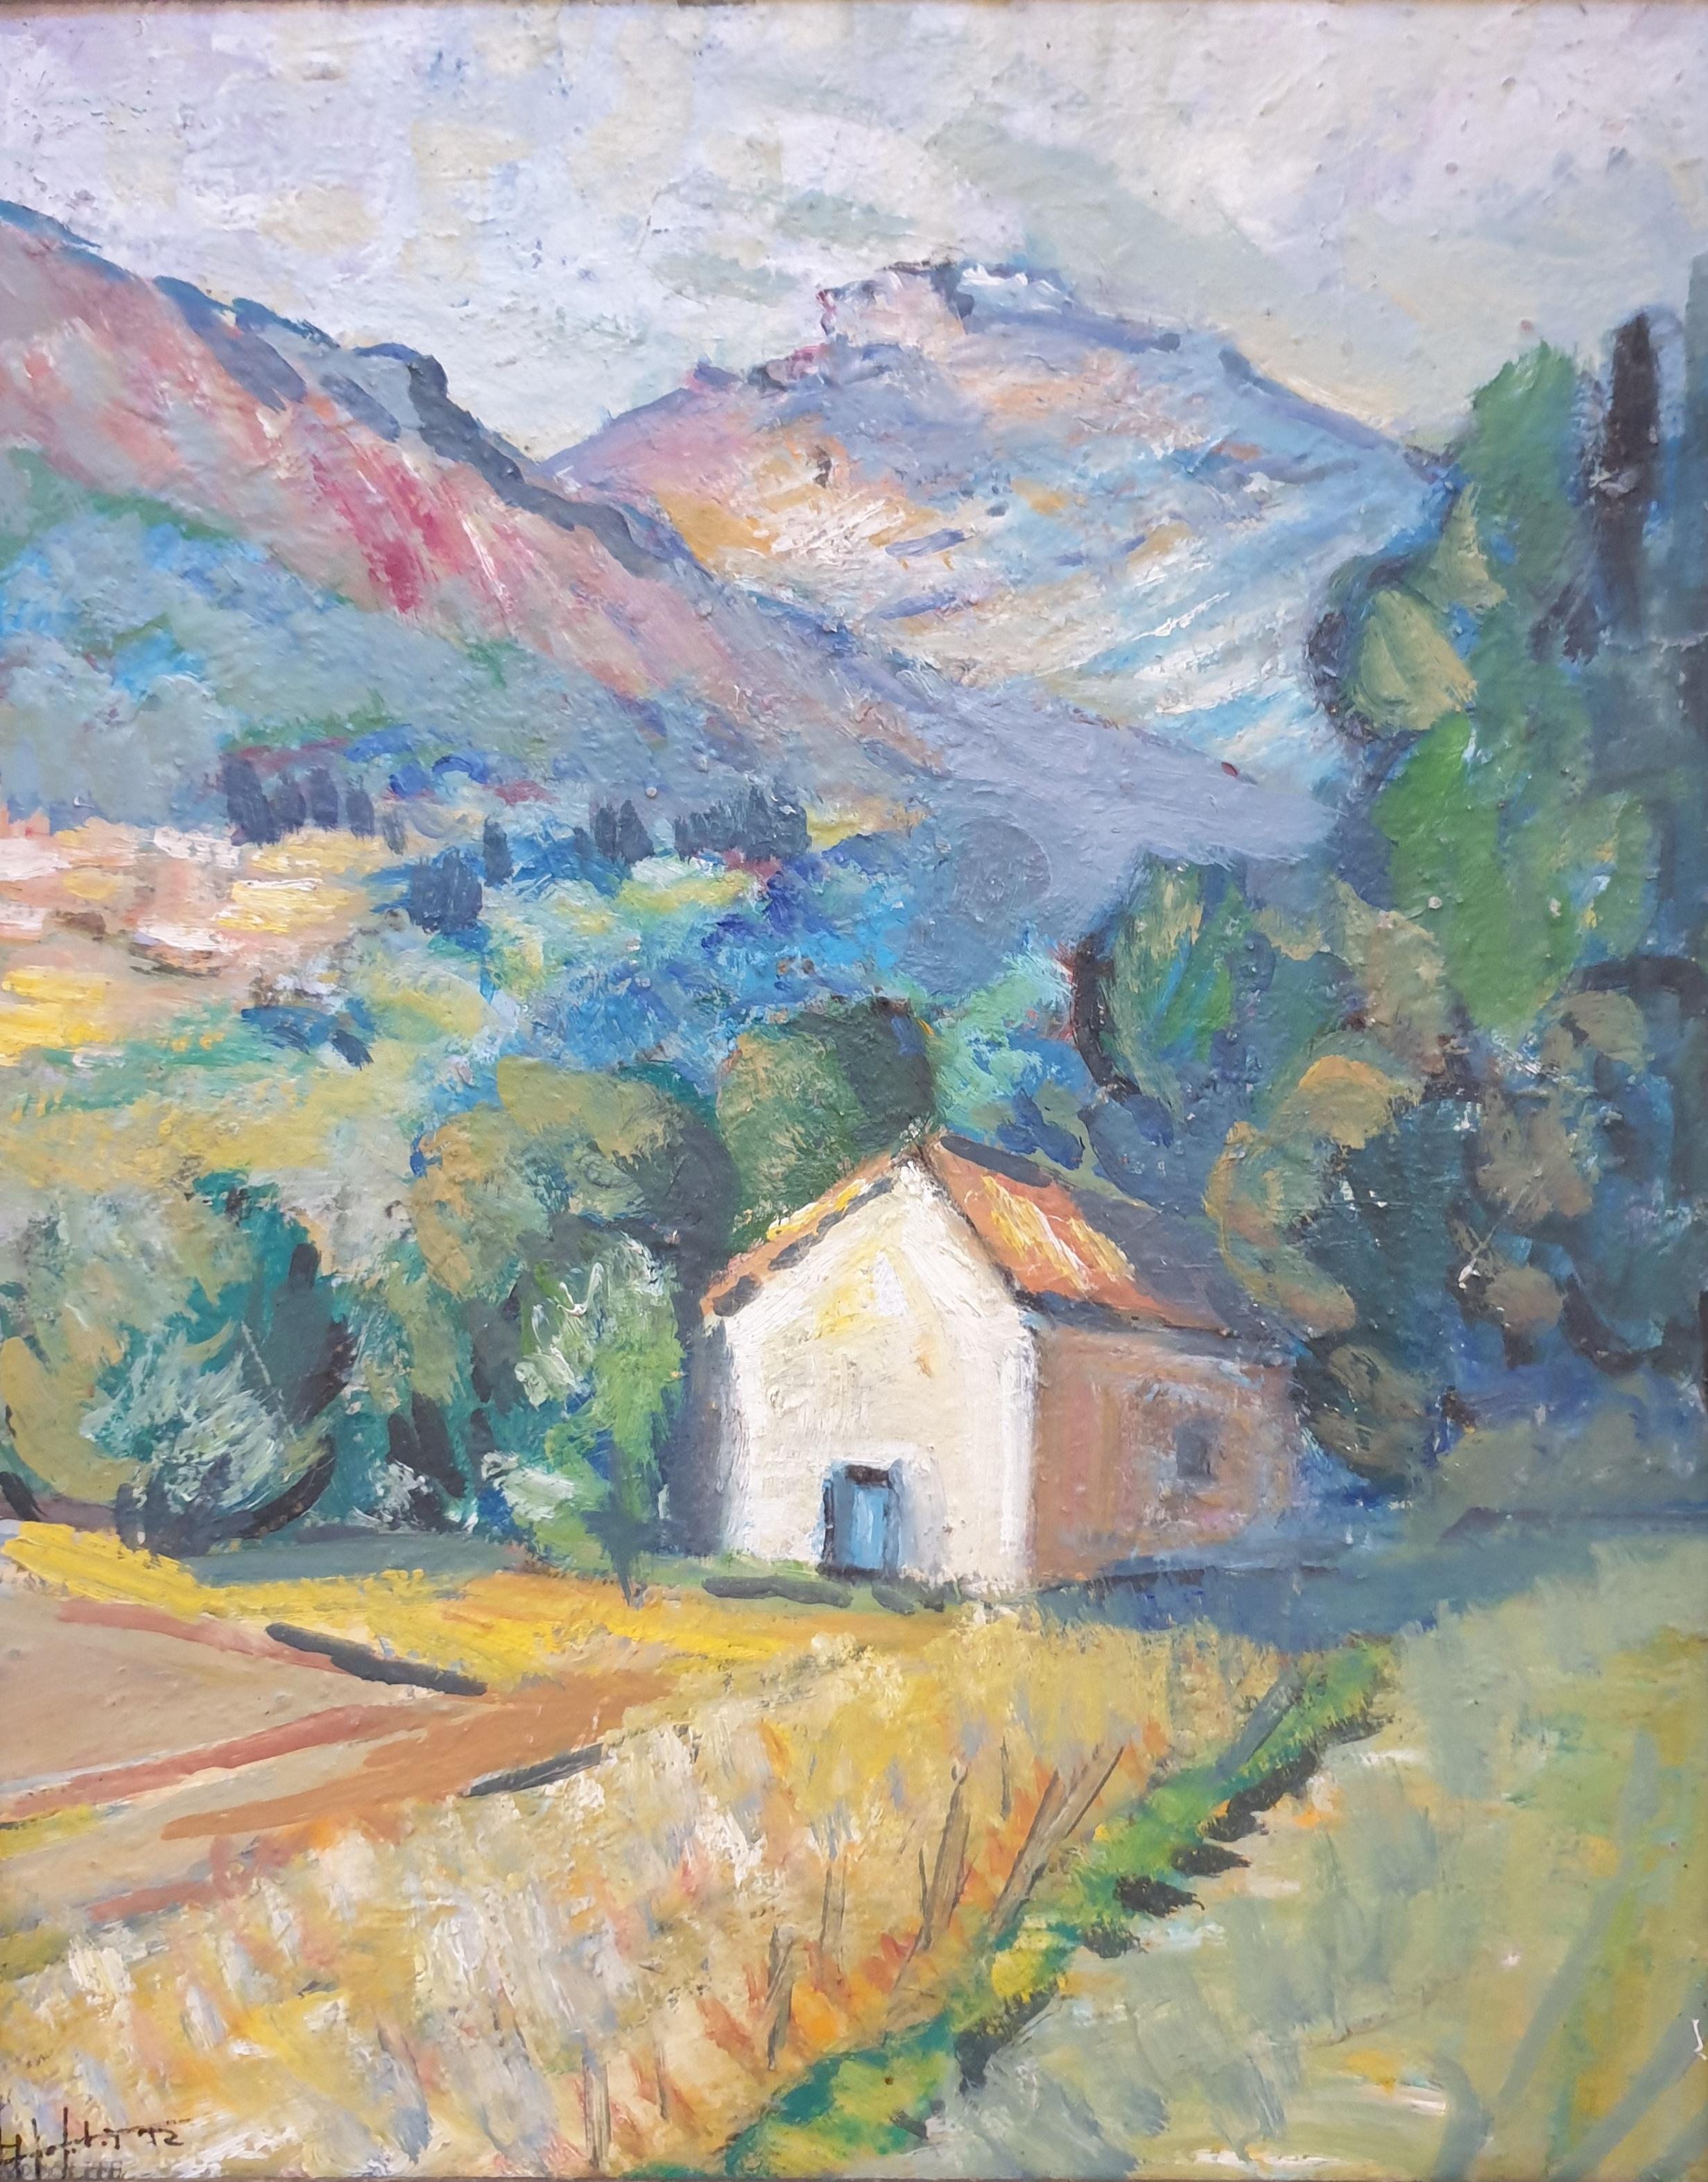 Mid-century Fauvist Landscape in the South of France.  - Painting by Hyppolite Roger